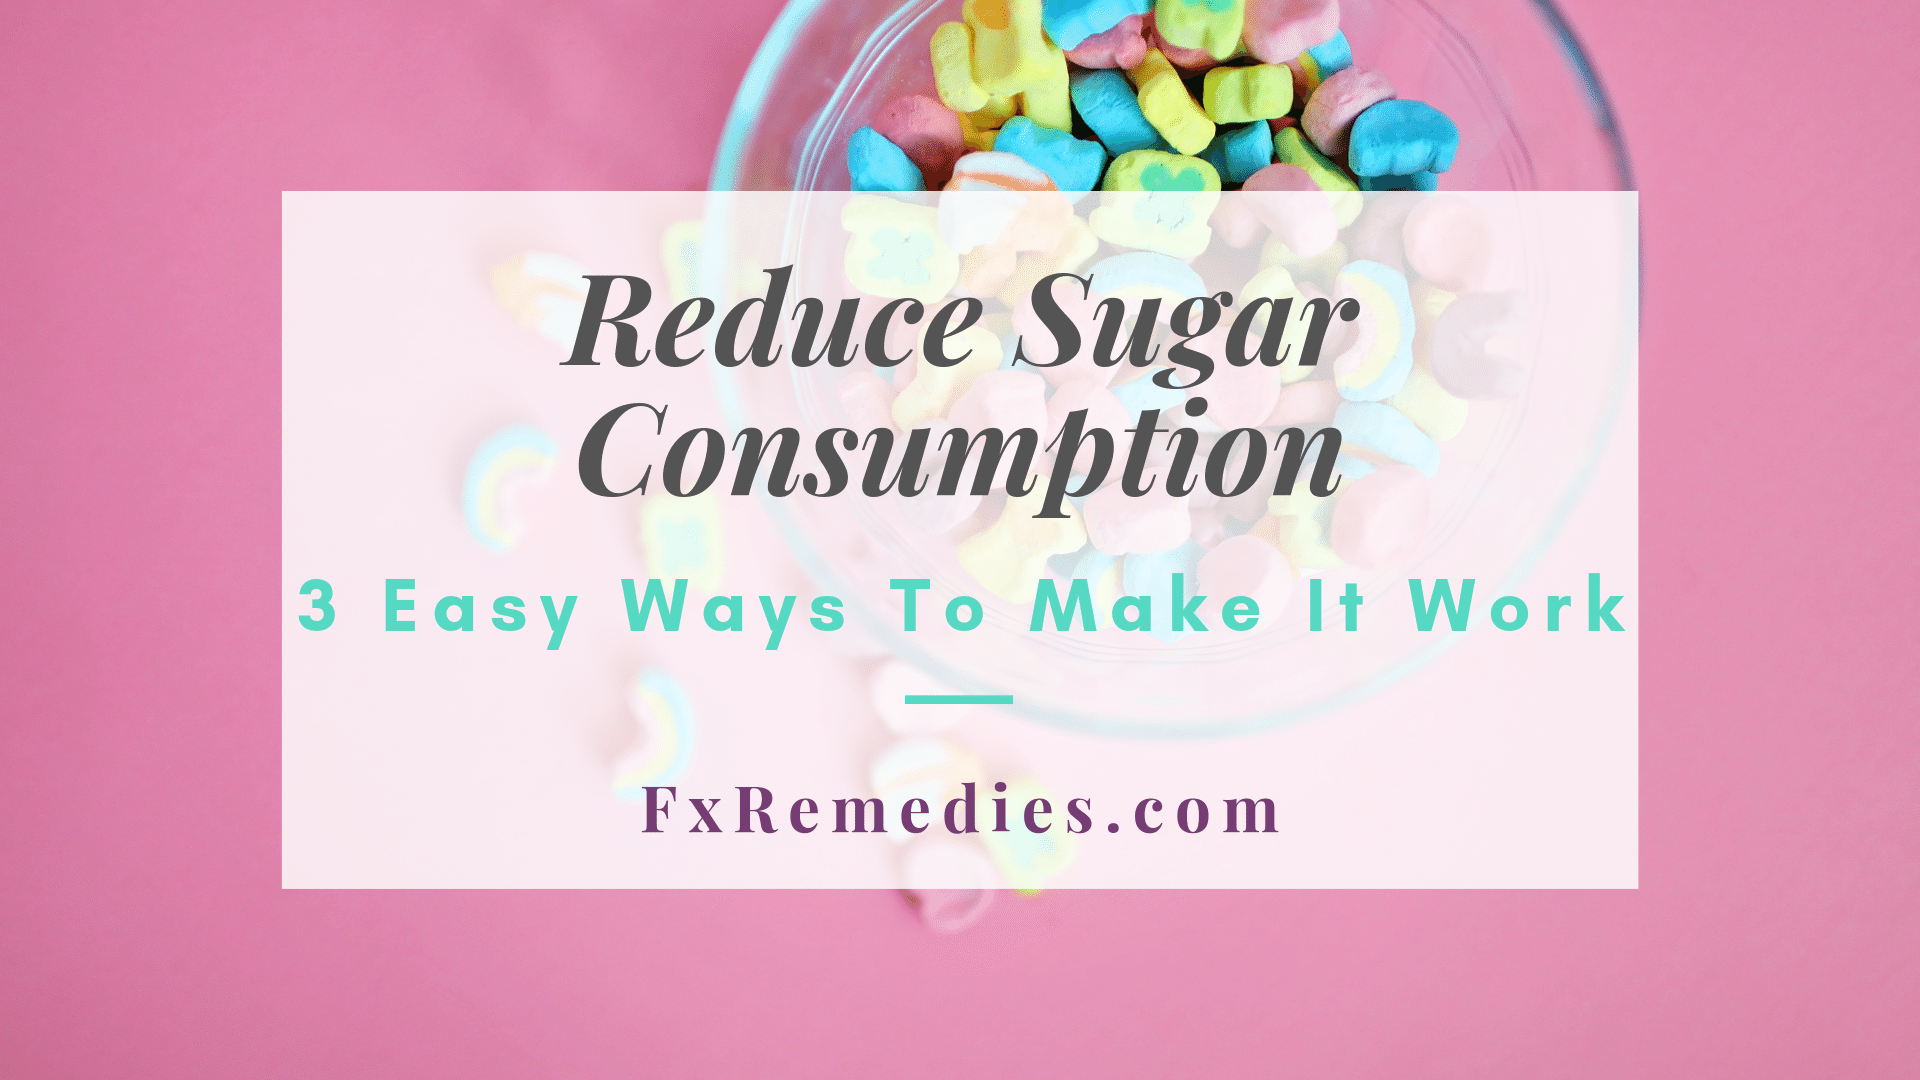 We know all this sugar isn’t good for us, maybe it's time for you to reduce sugar. It’s rotting our teeth, giving us Type II Diabetes, and contributing to the obesity epidemic in the western world.